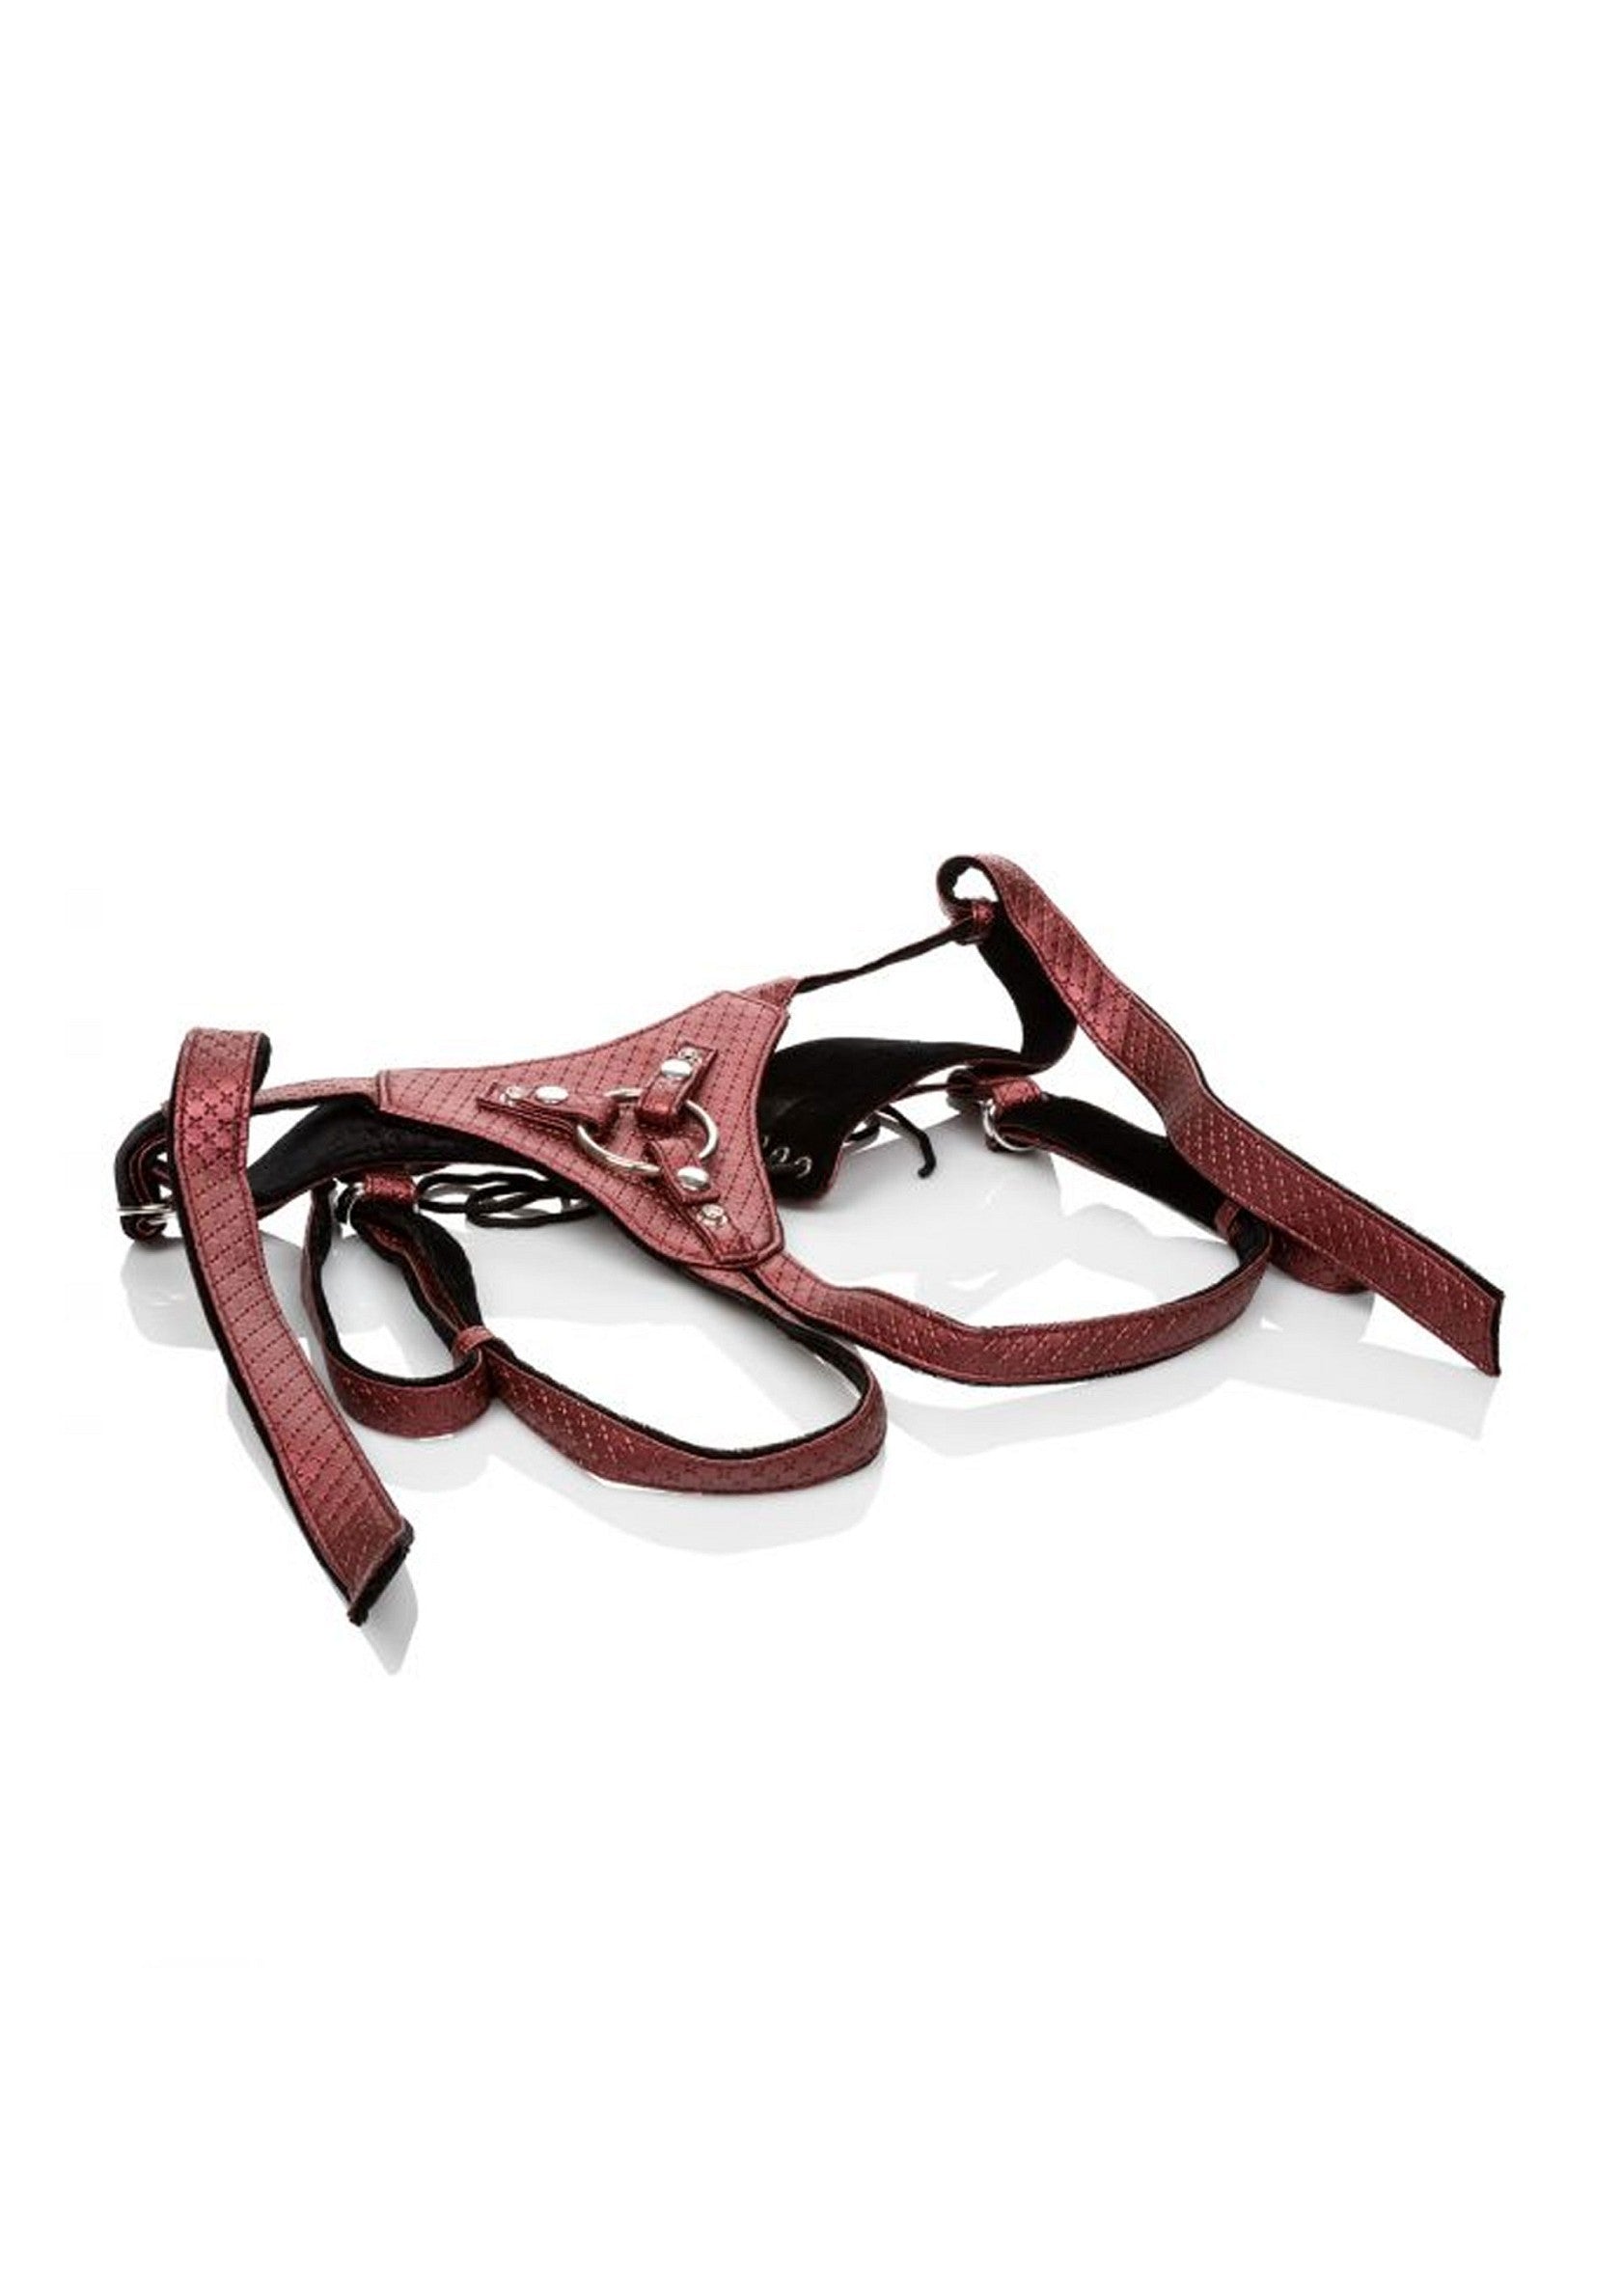 CalExotics Her Royal Harness The Regal Queen RED - 3